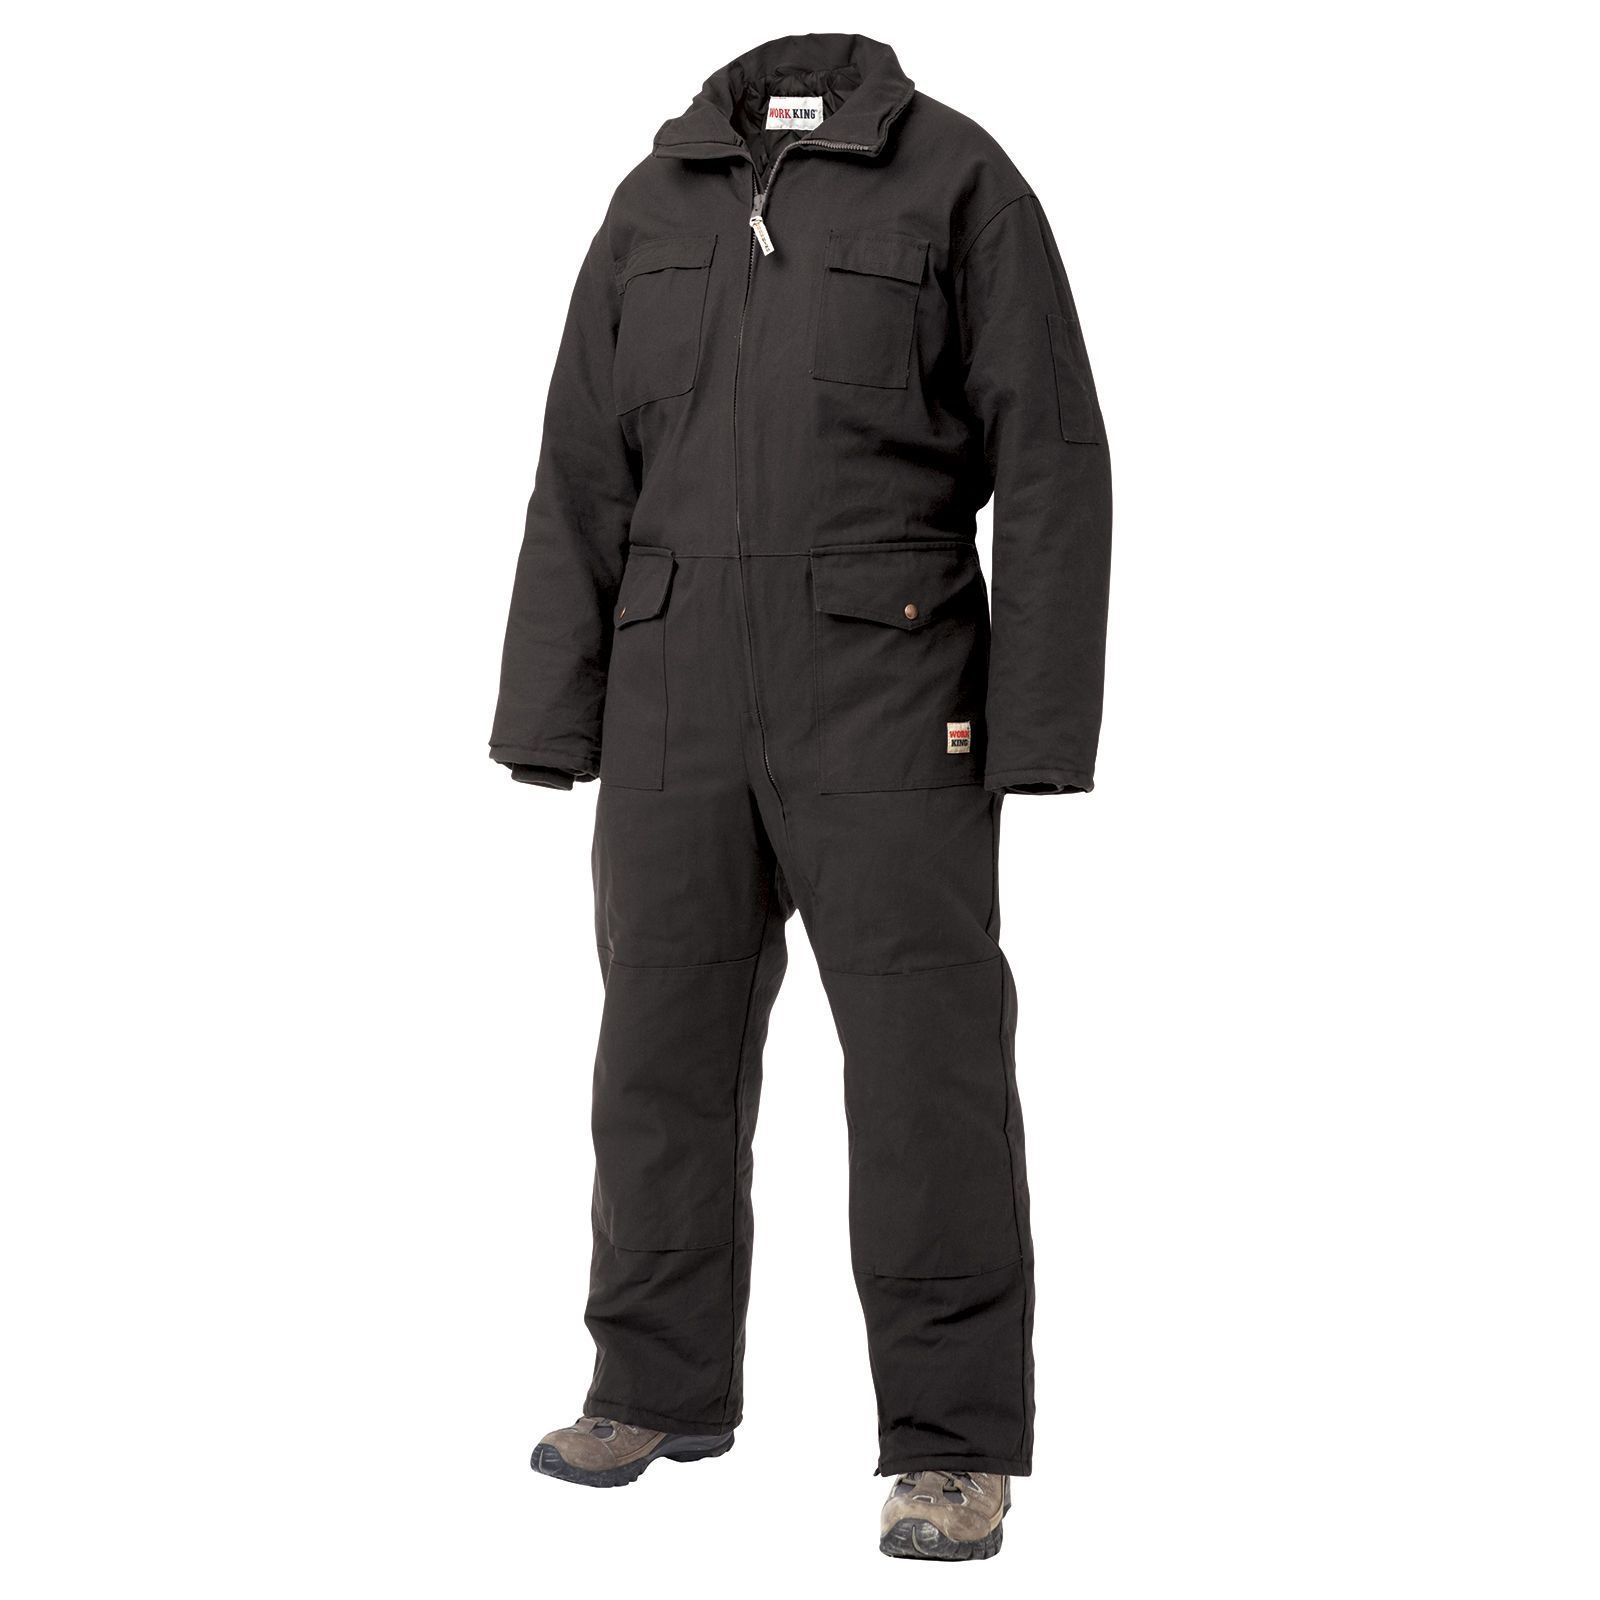 Work King Deluxe Lined Coverall